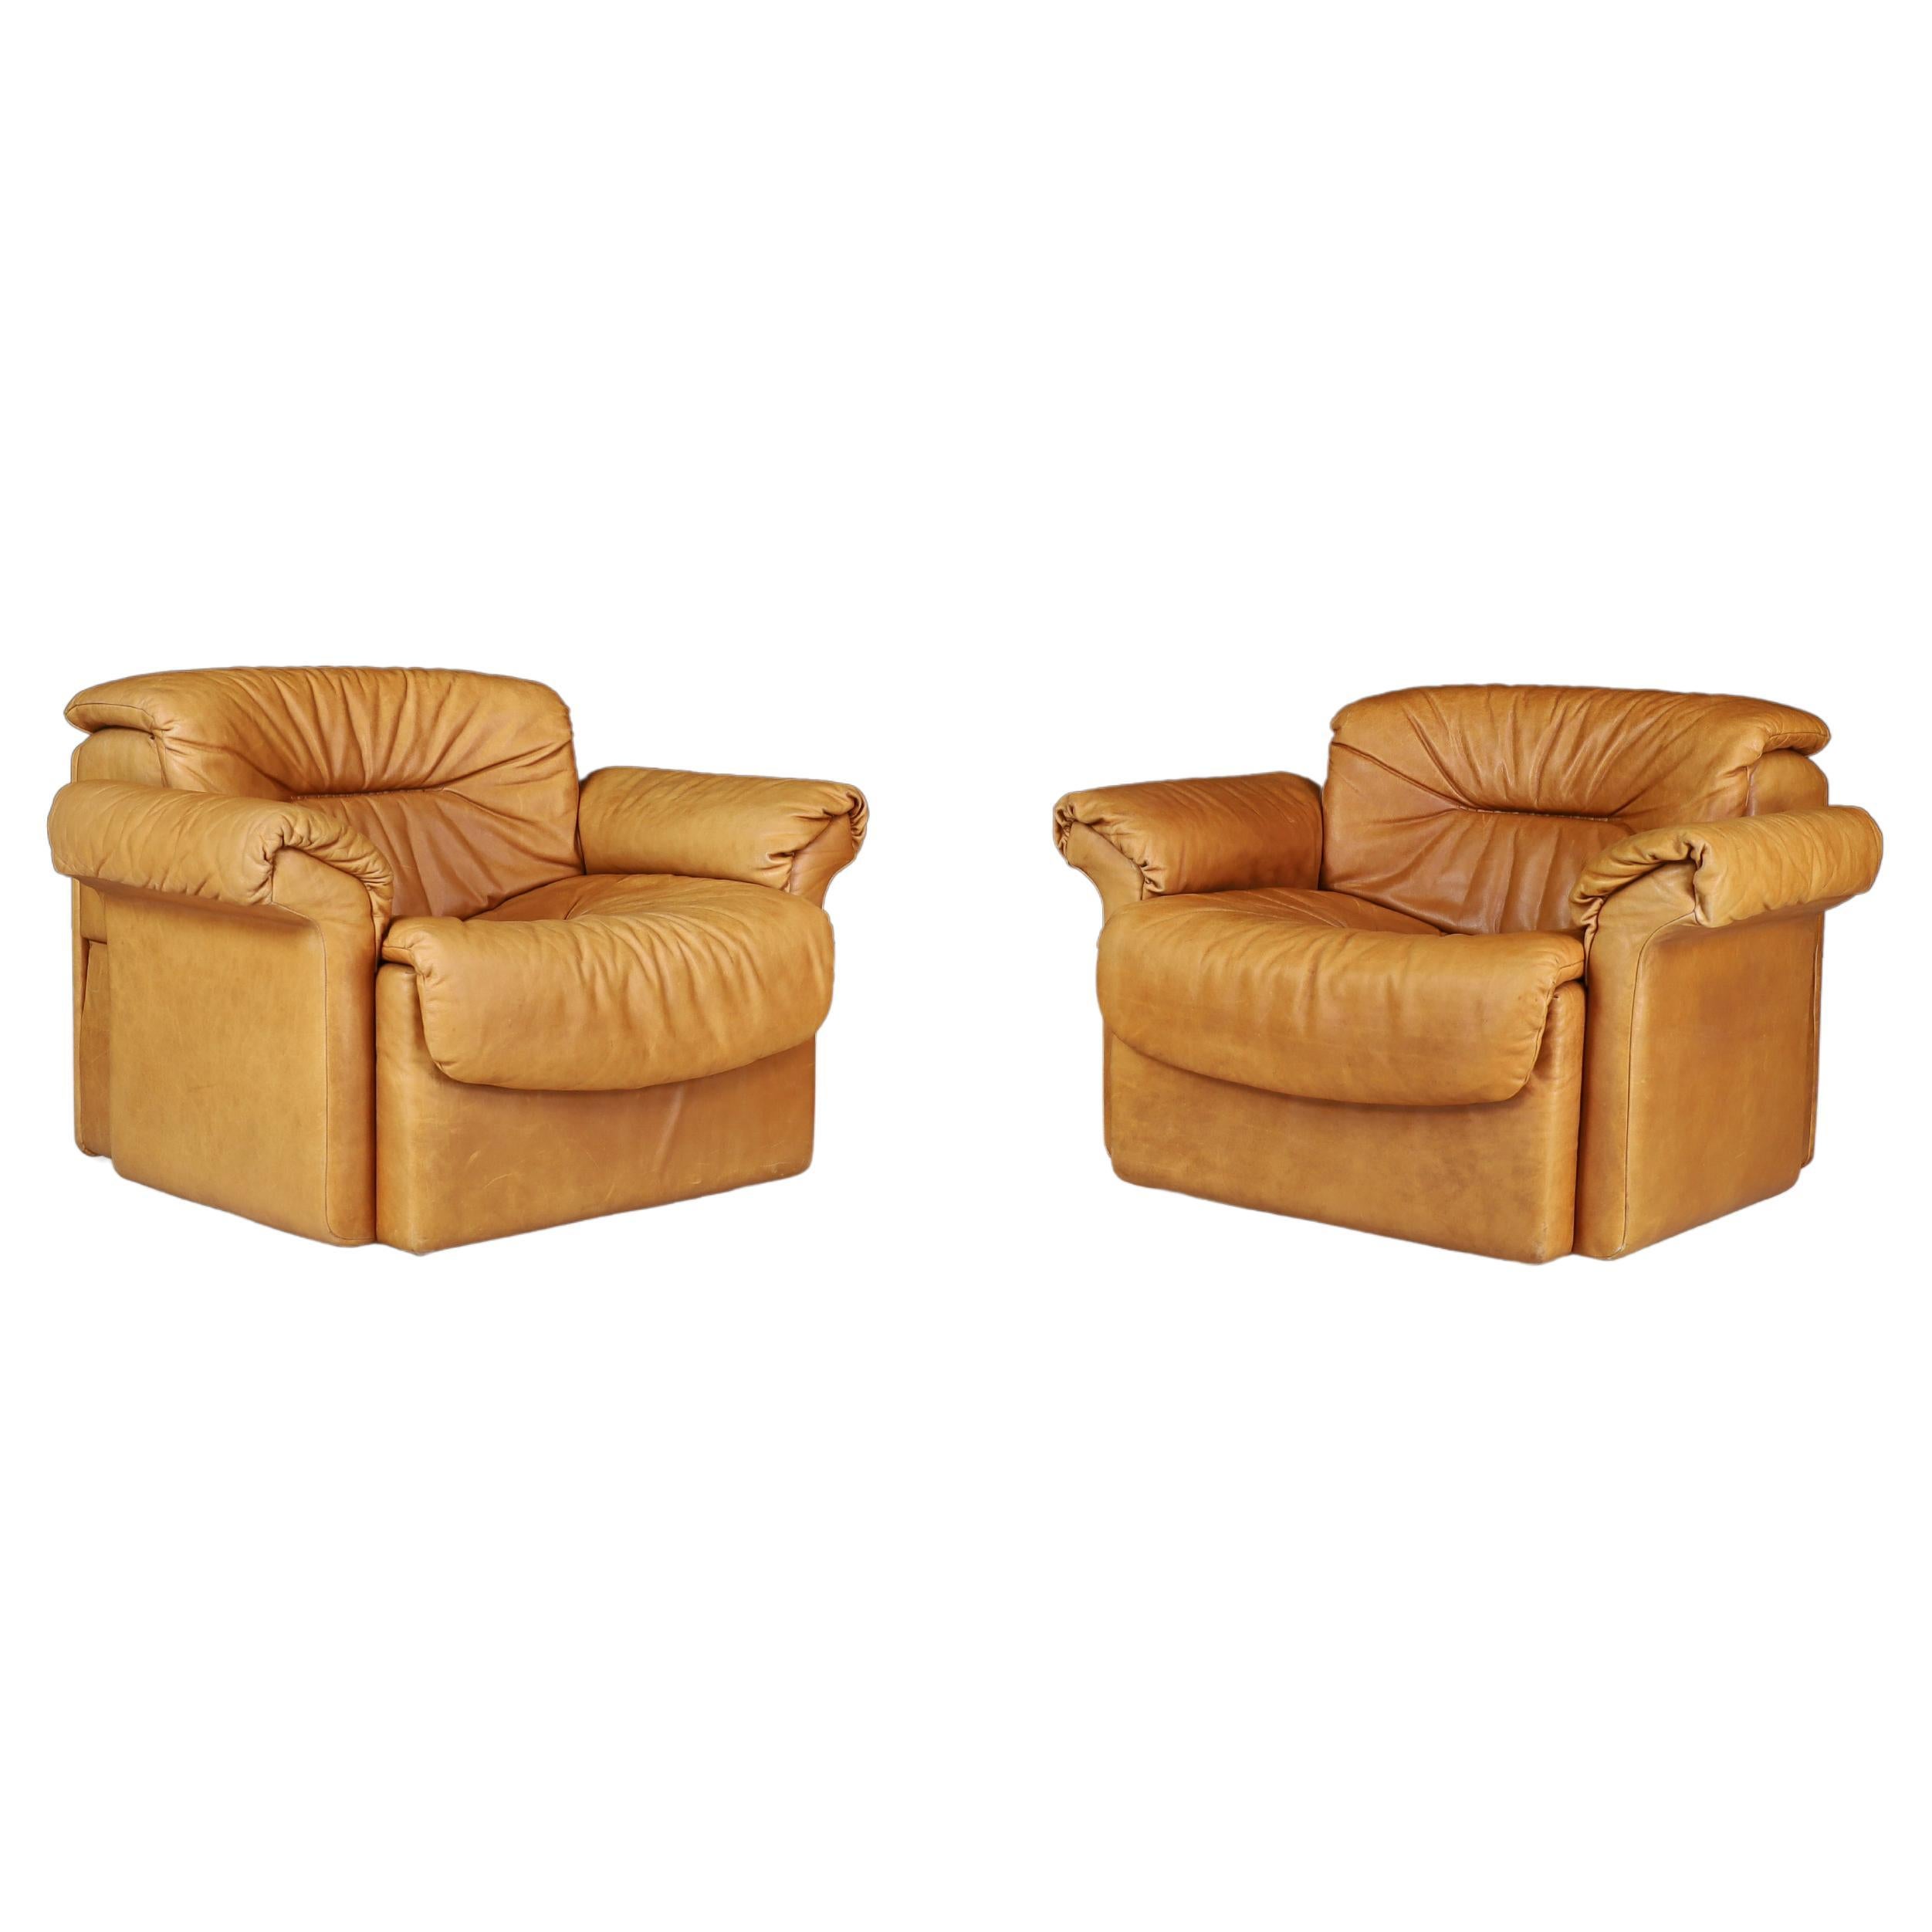 De Sede DS 14 Lounge Chairs in Patinated Cognac Leather, Switzerland, 1970s For Sale